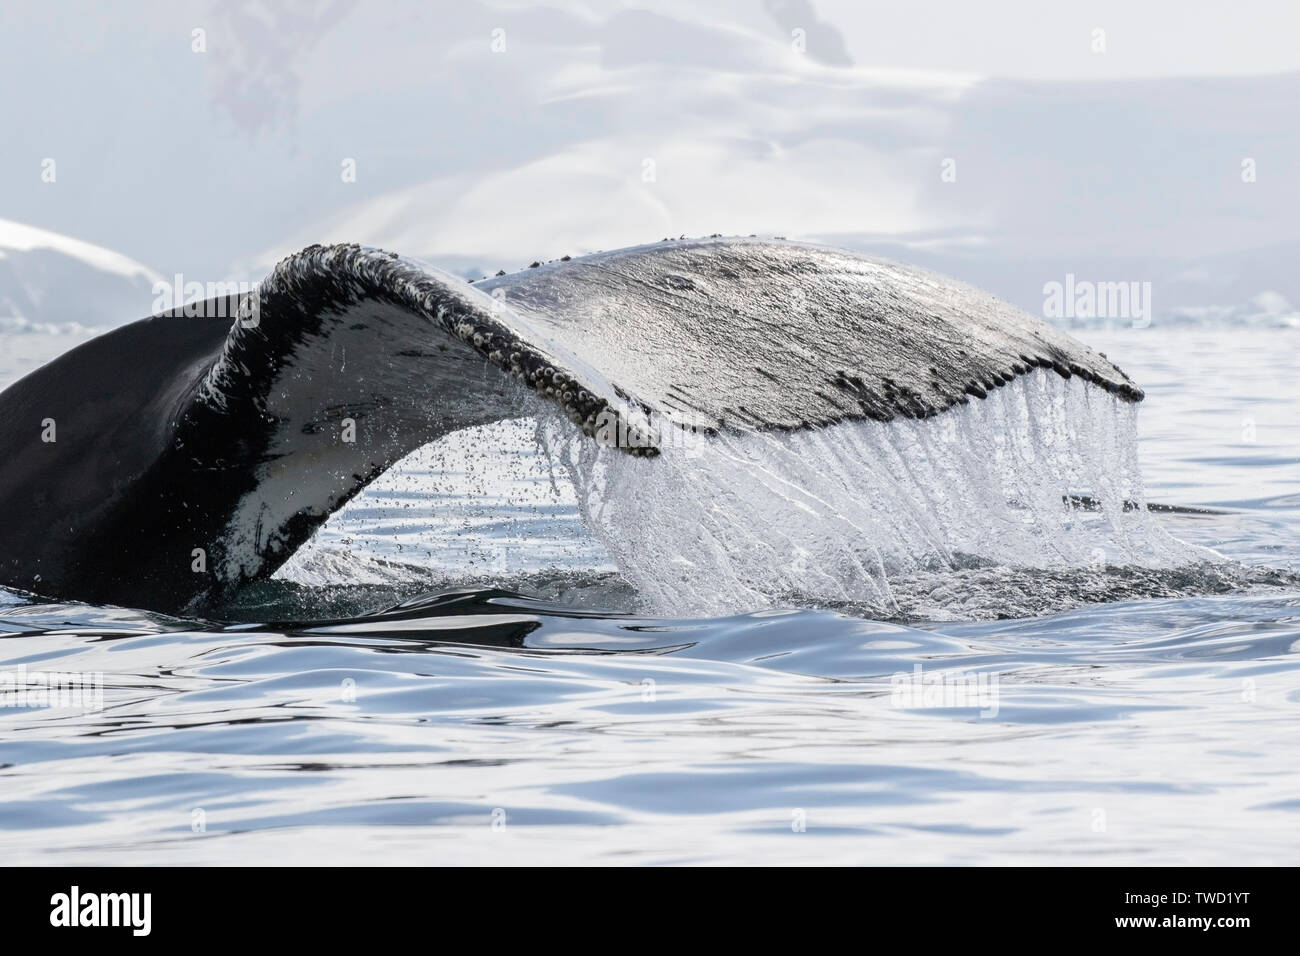 Humpback whale (Megaptera novaeangliae) adult swimming in southern ocean, Antarctica Stock Photo